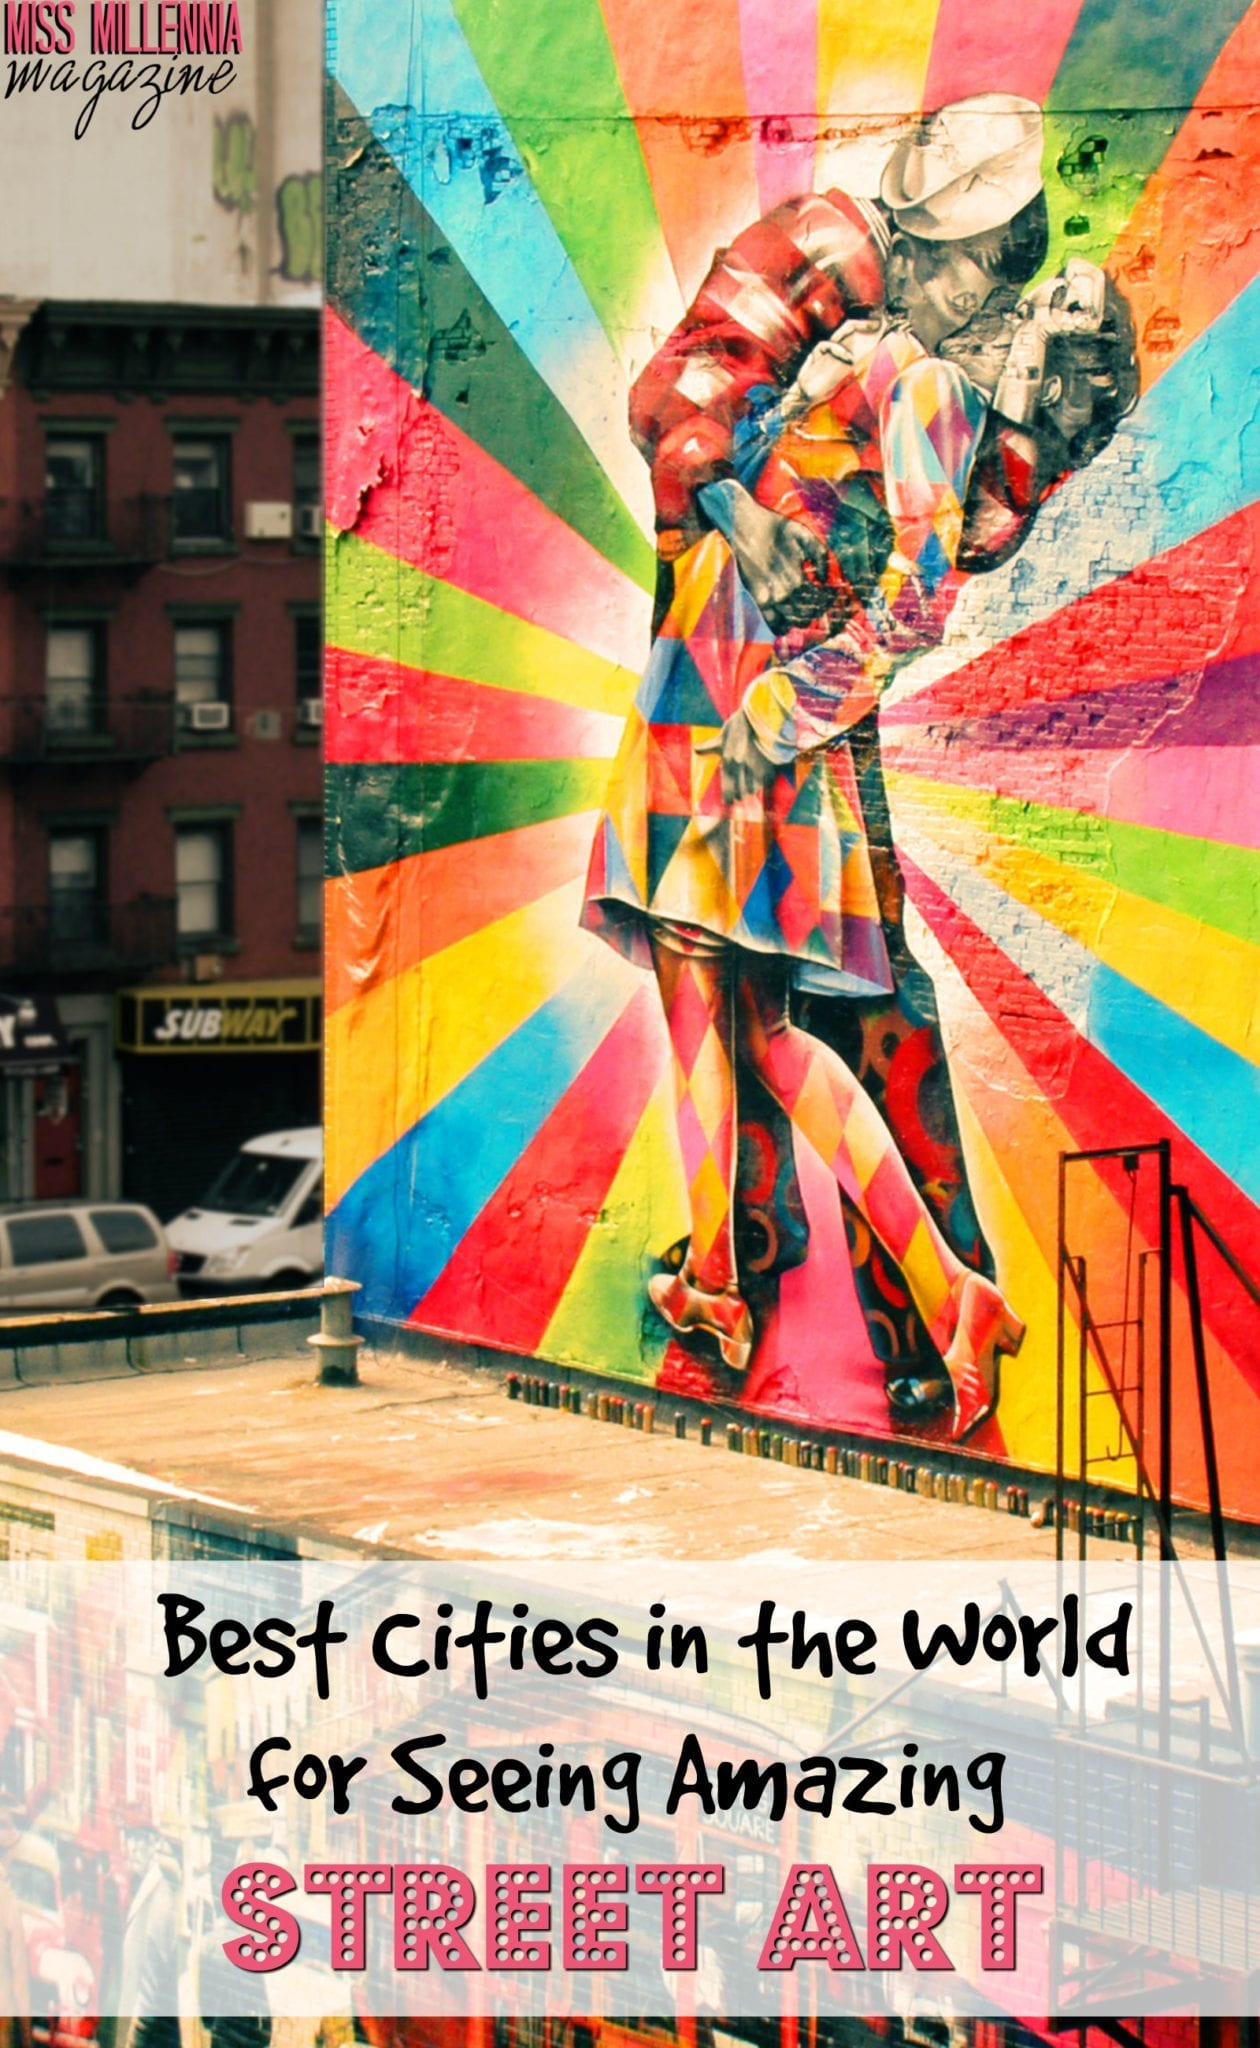 the-best-cities-in-the-world-for-seeing-amazing-street-art